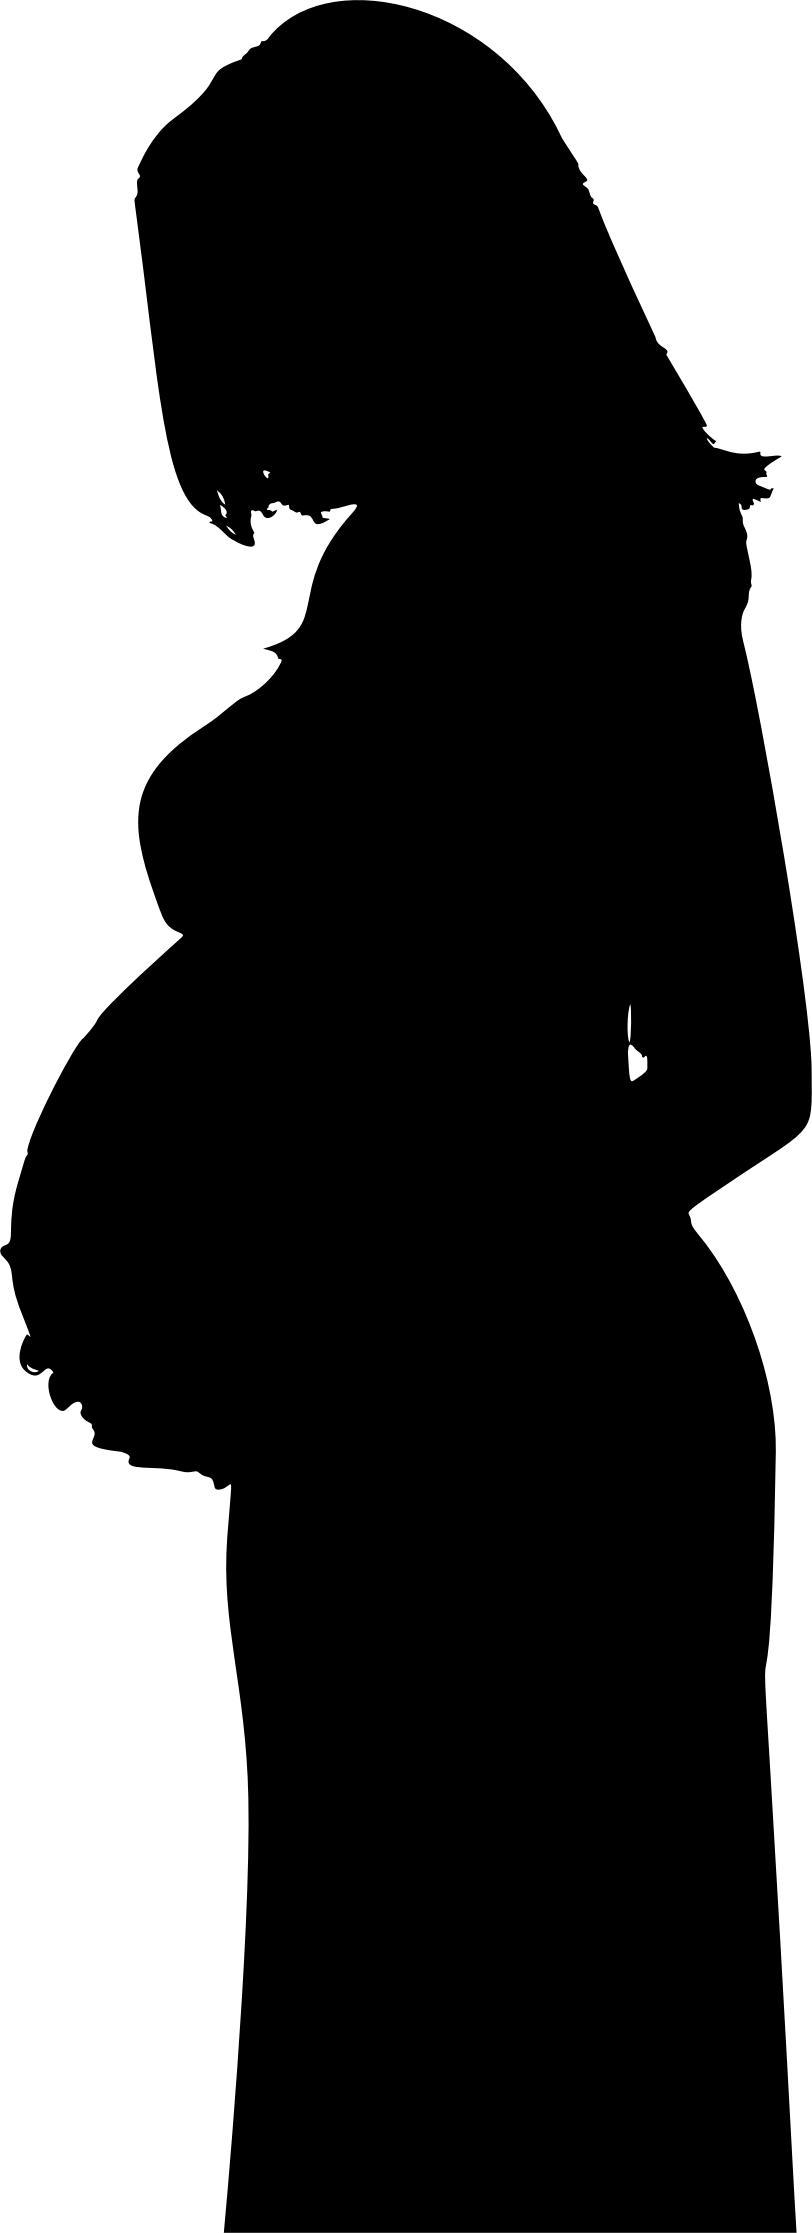 Expecting Mother Silhouette png transparent